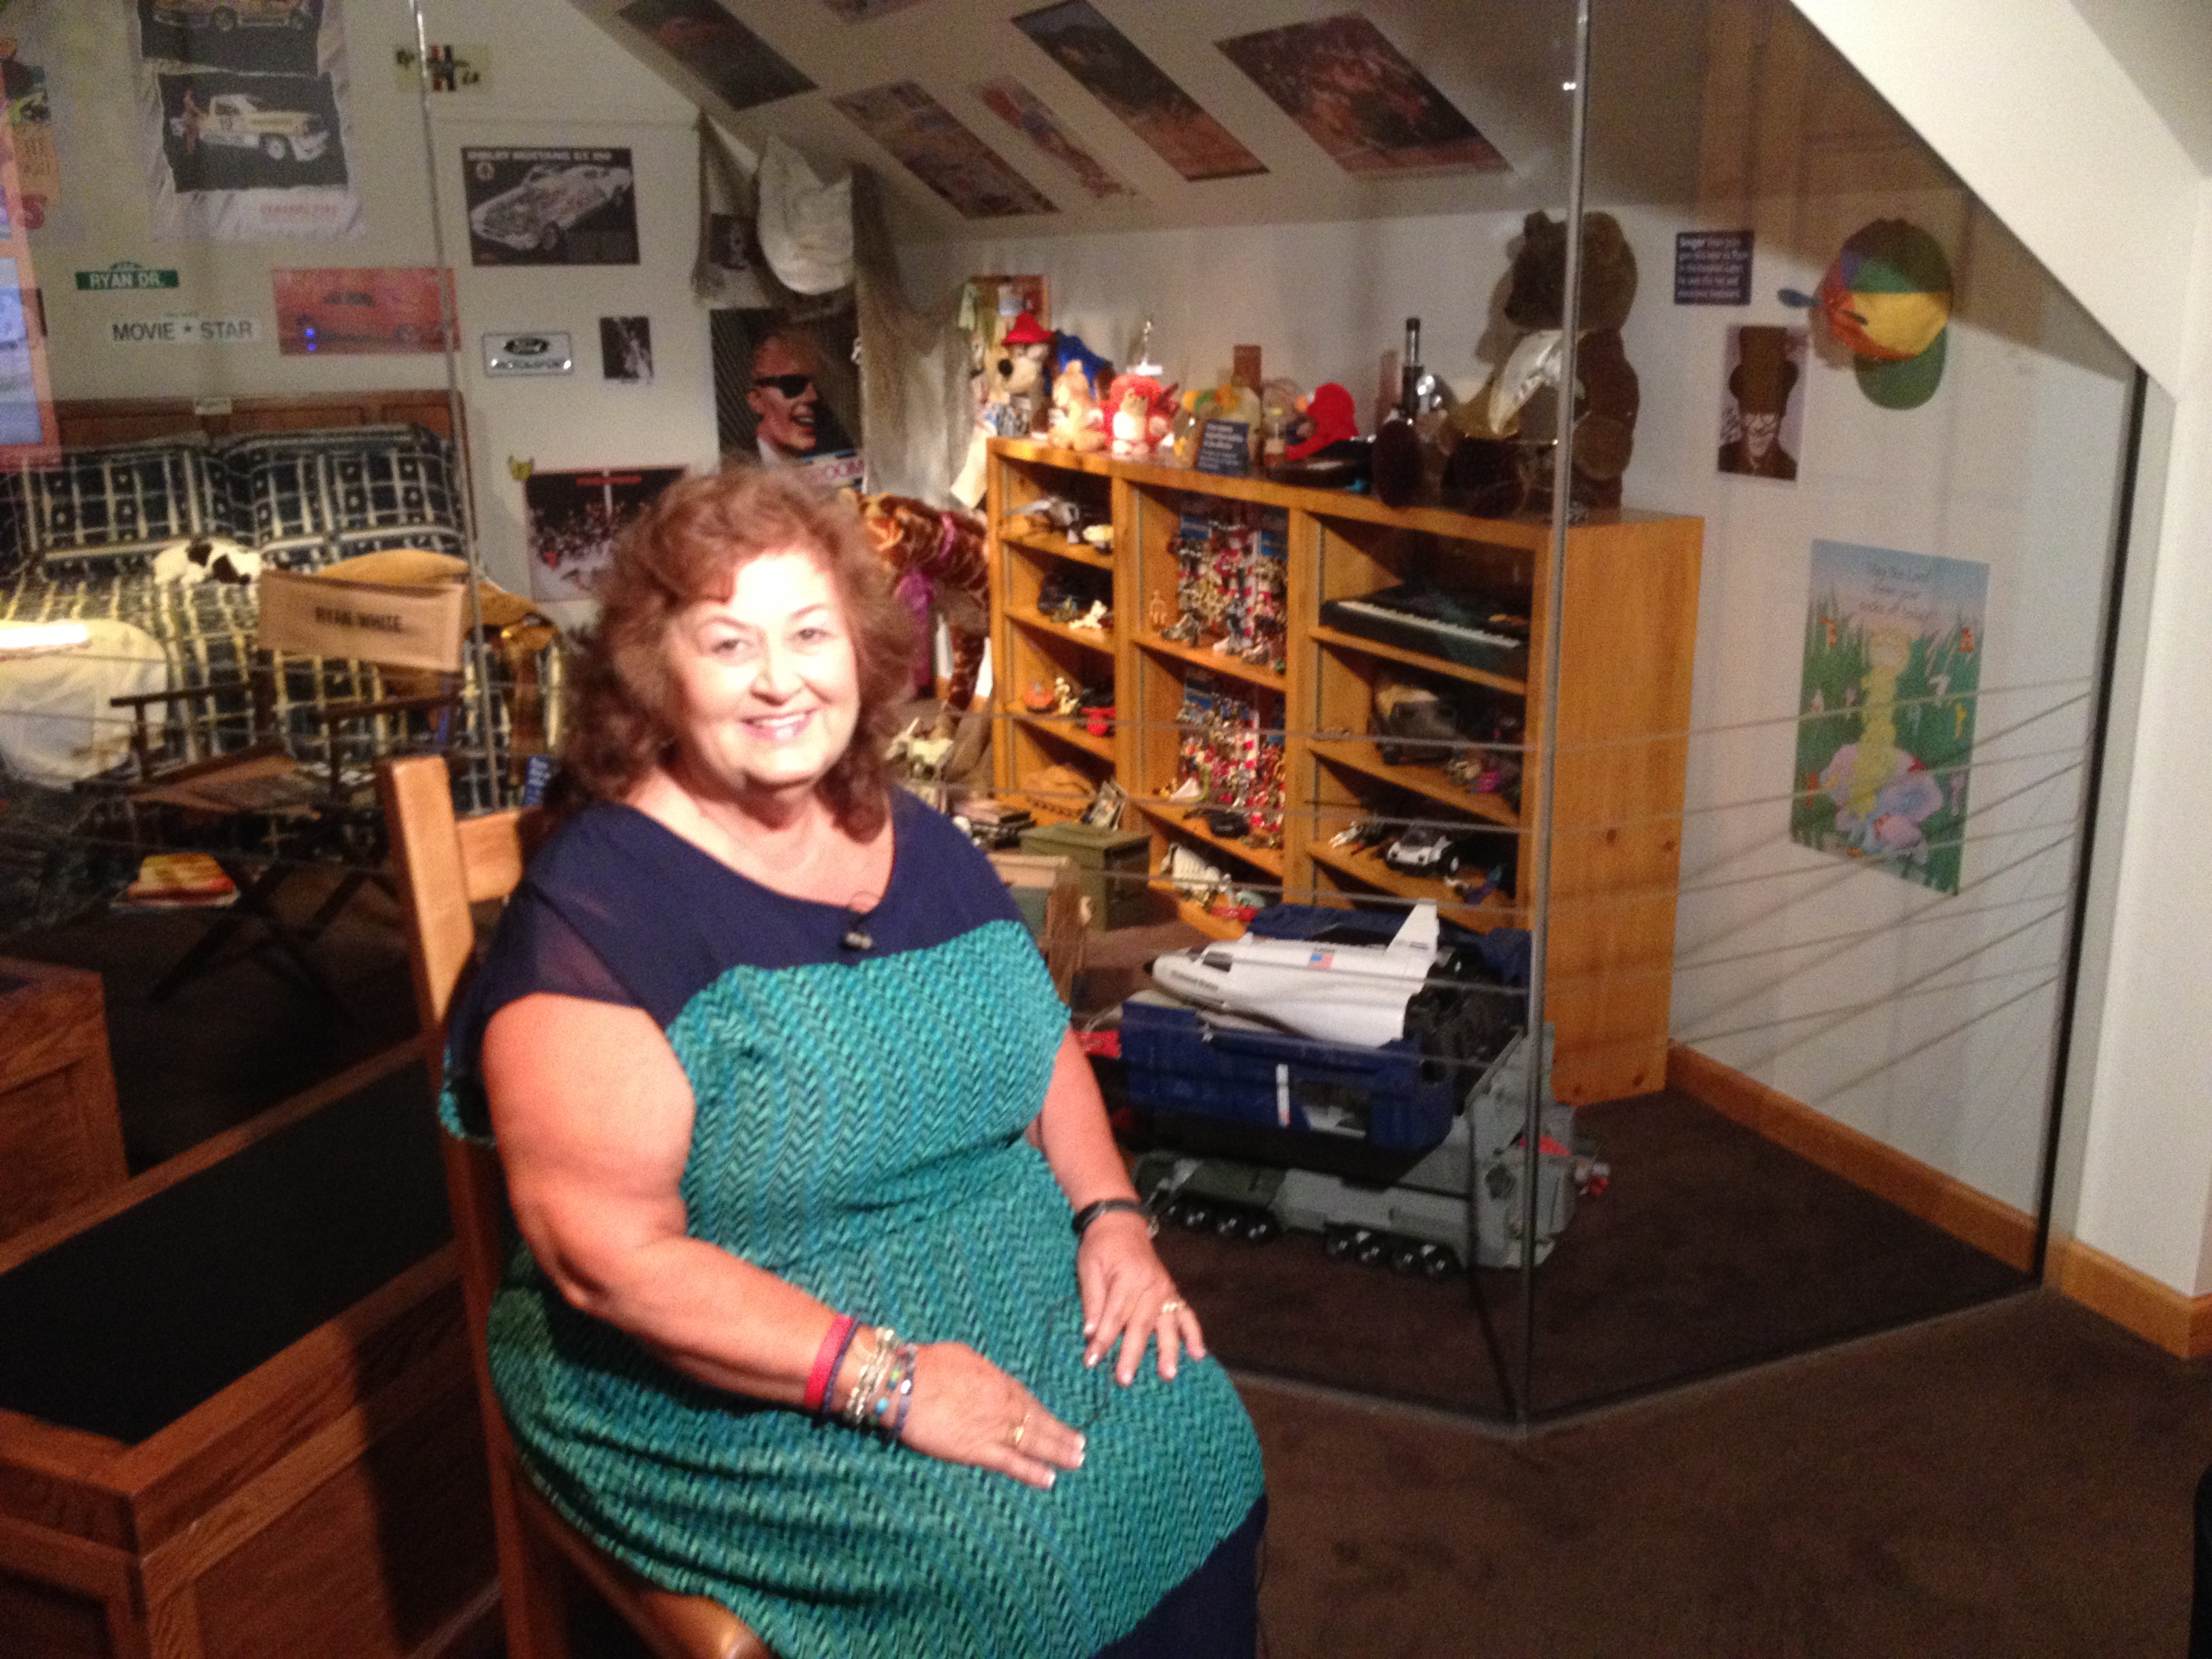 Jeanne White Ginder in front of recreation of her son Ryan White's room